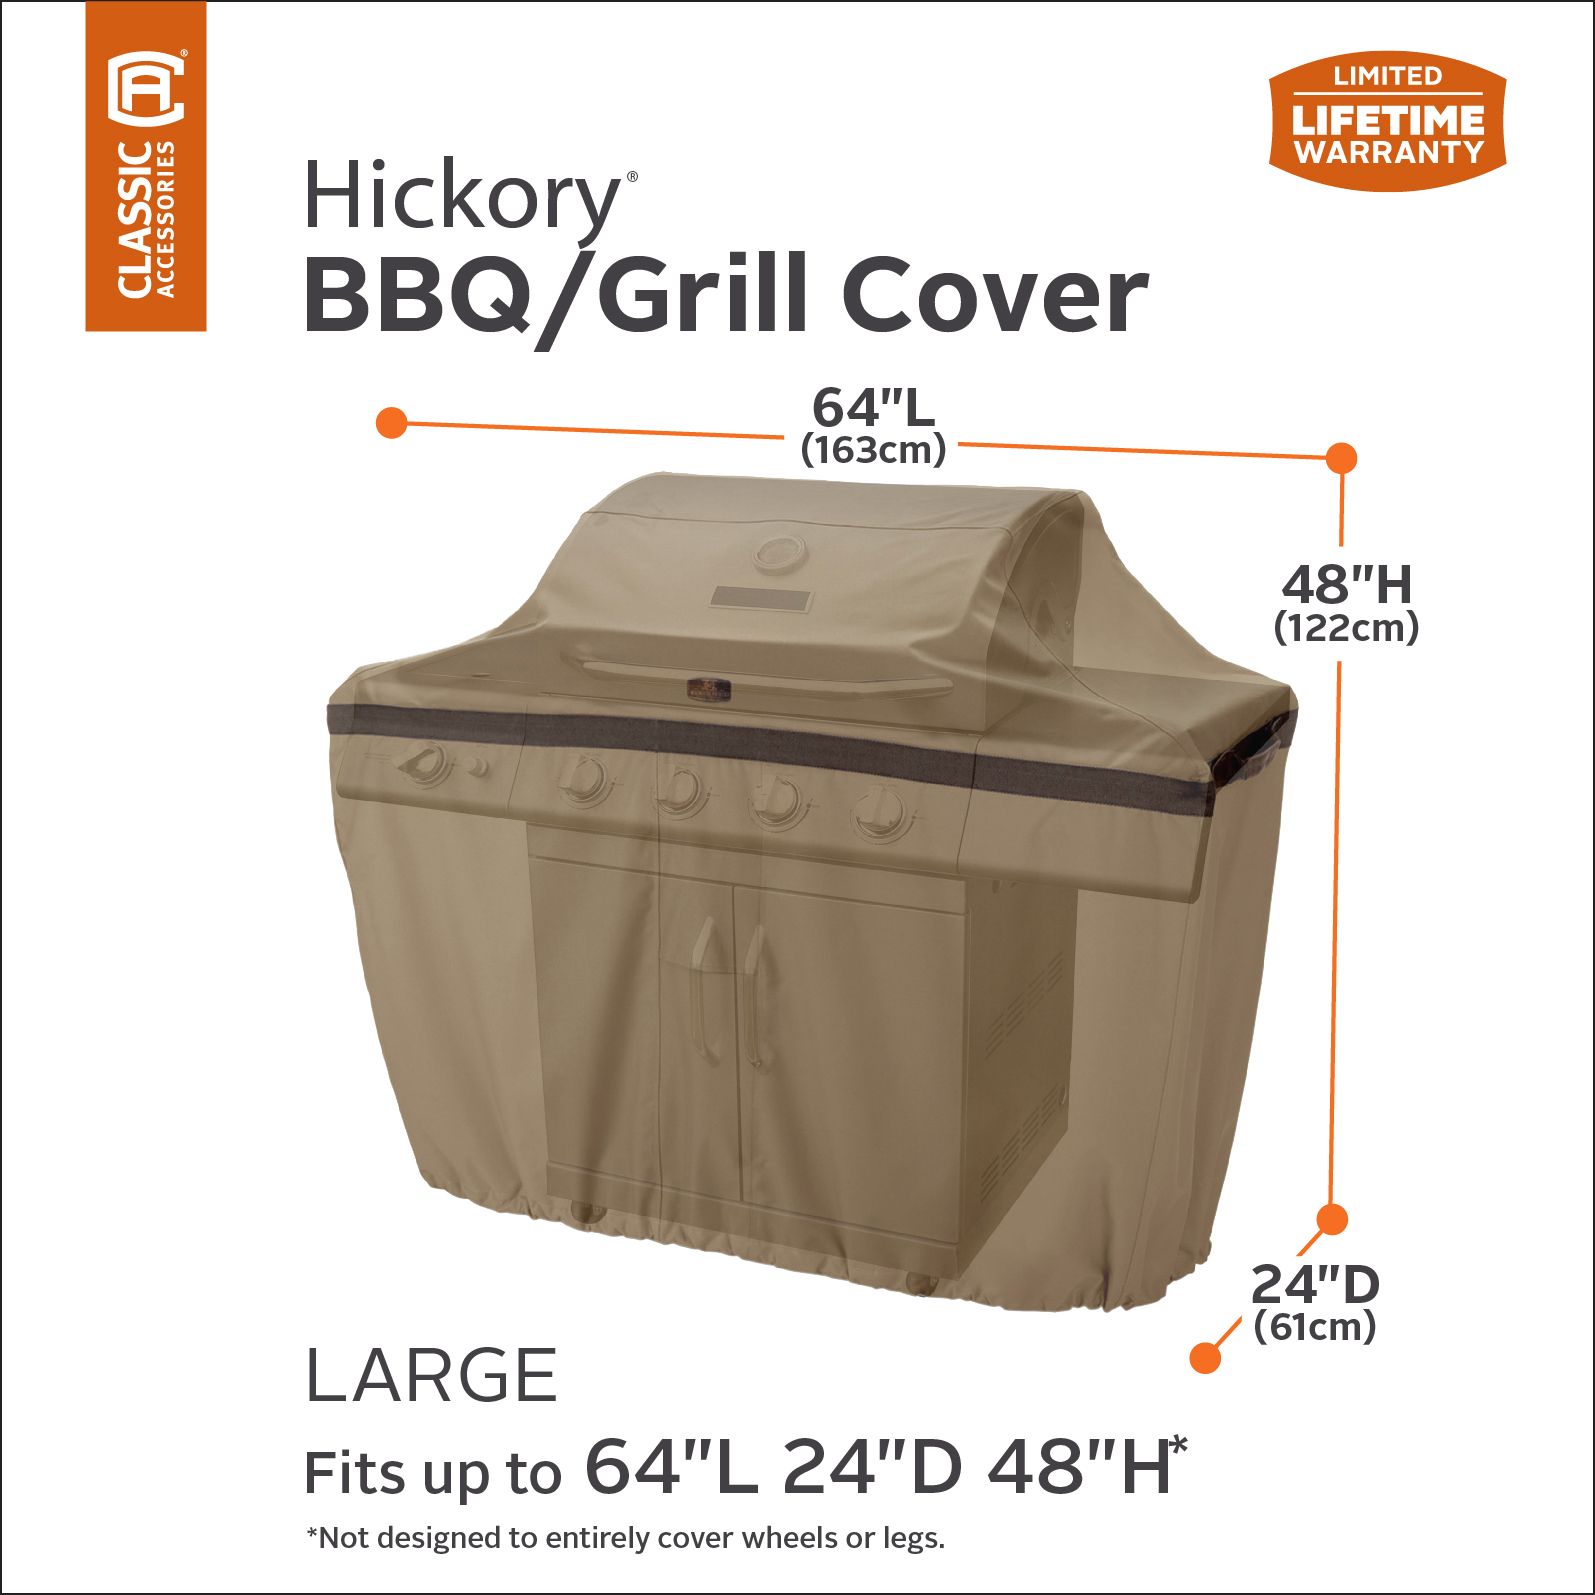 Classic Accessories Hickory® Grill Cover - Rugged BBQ Cover with Advanced Weather Protection, Large, 64-Inch - image 4 of 15